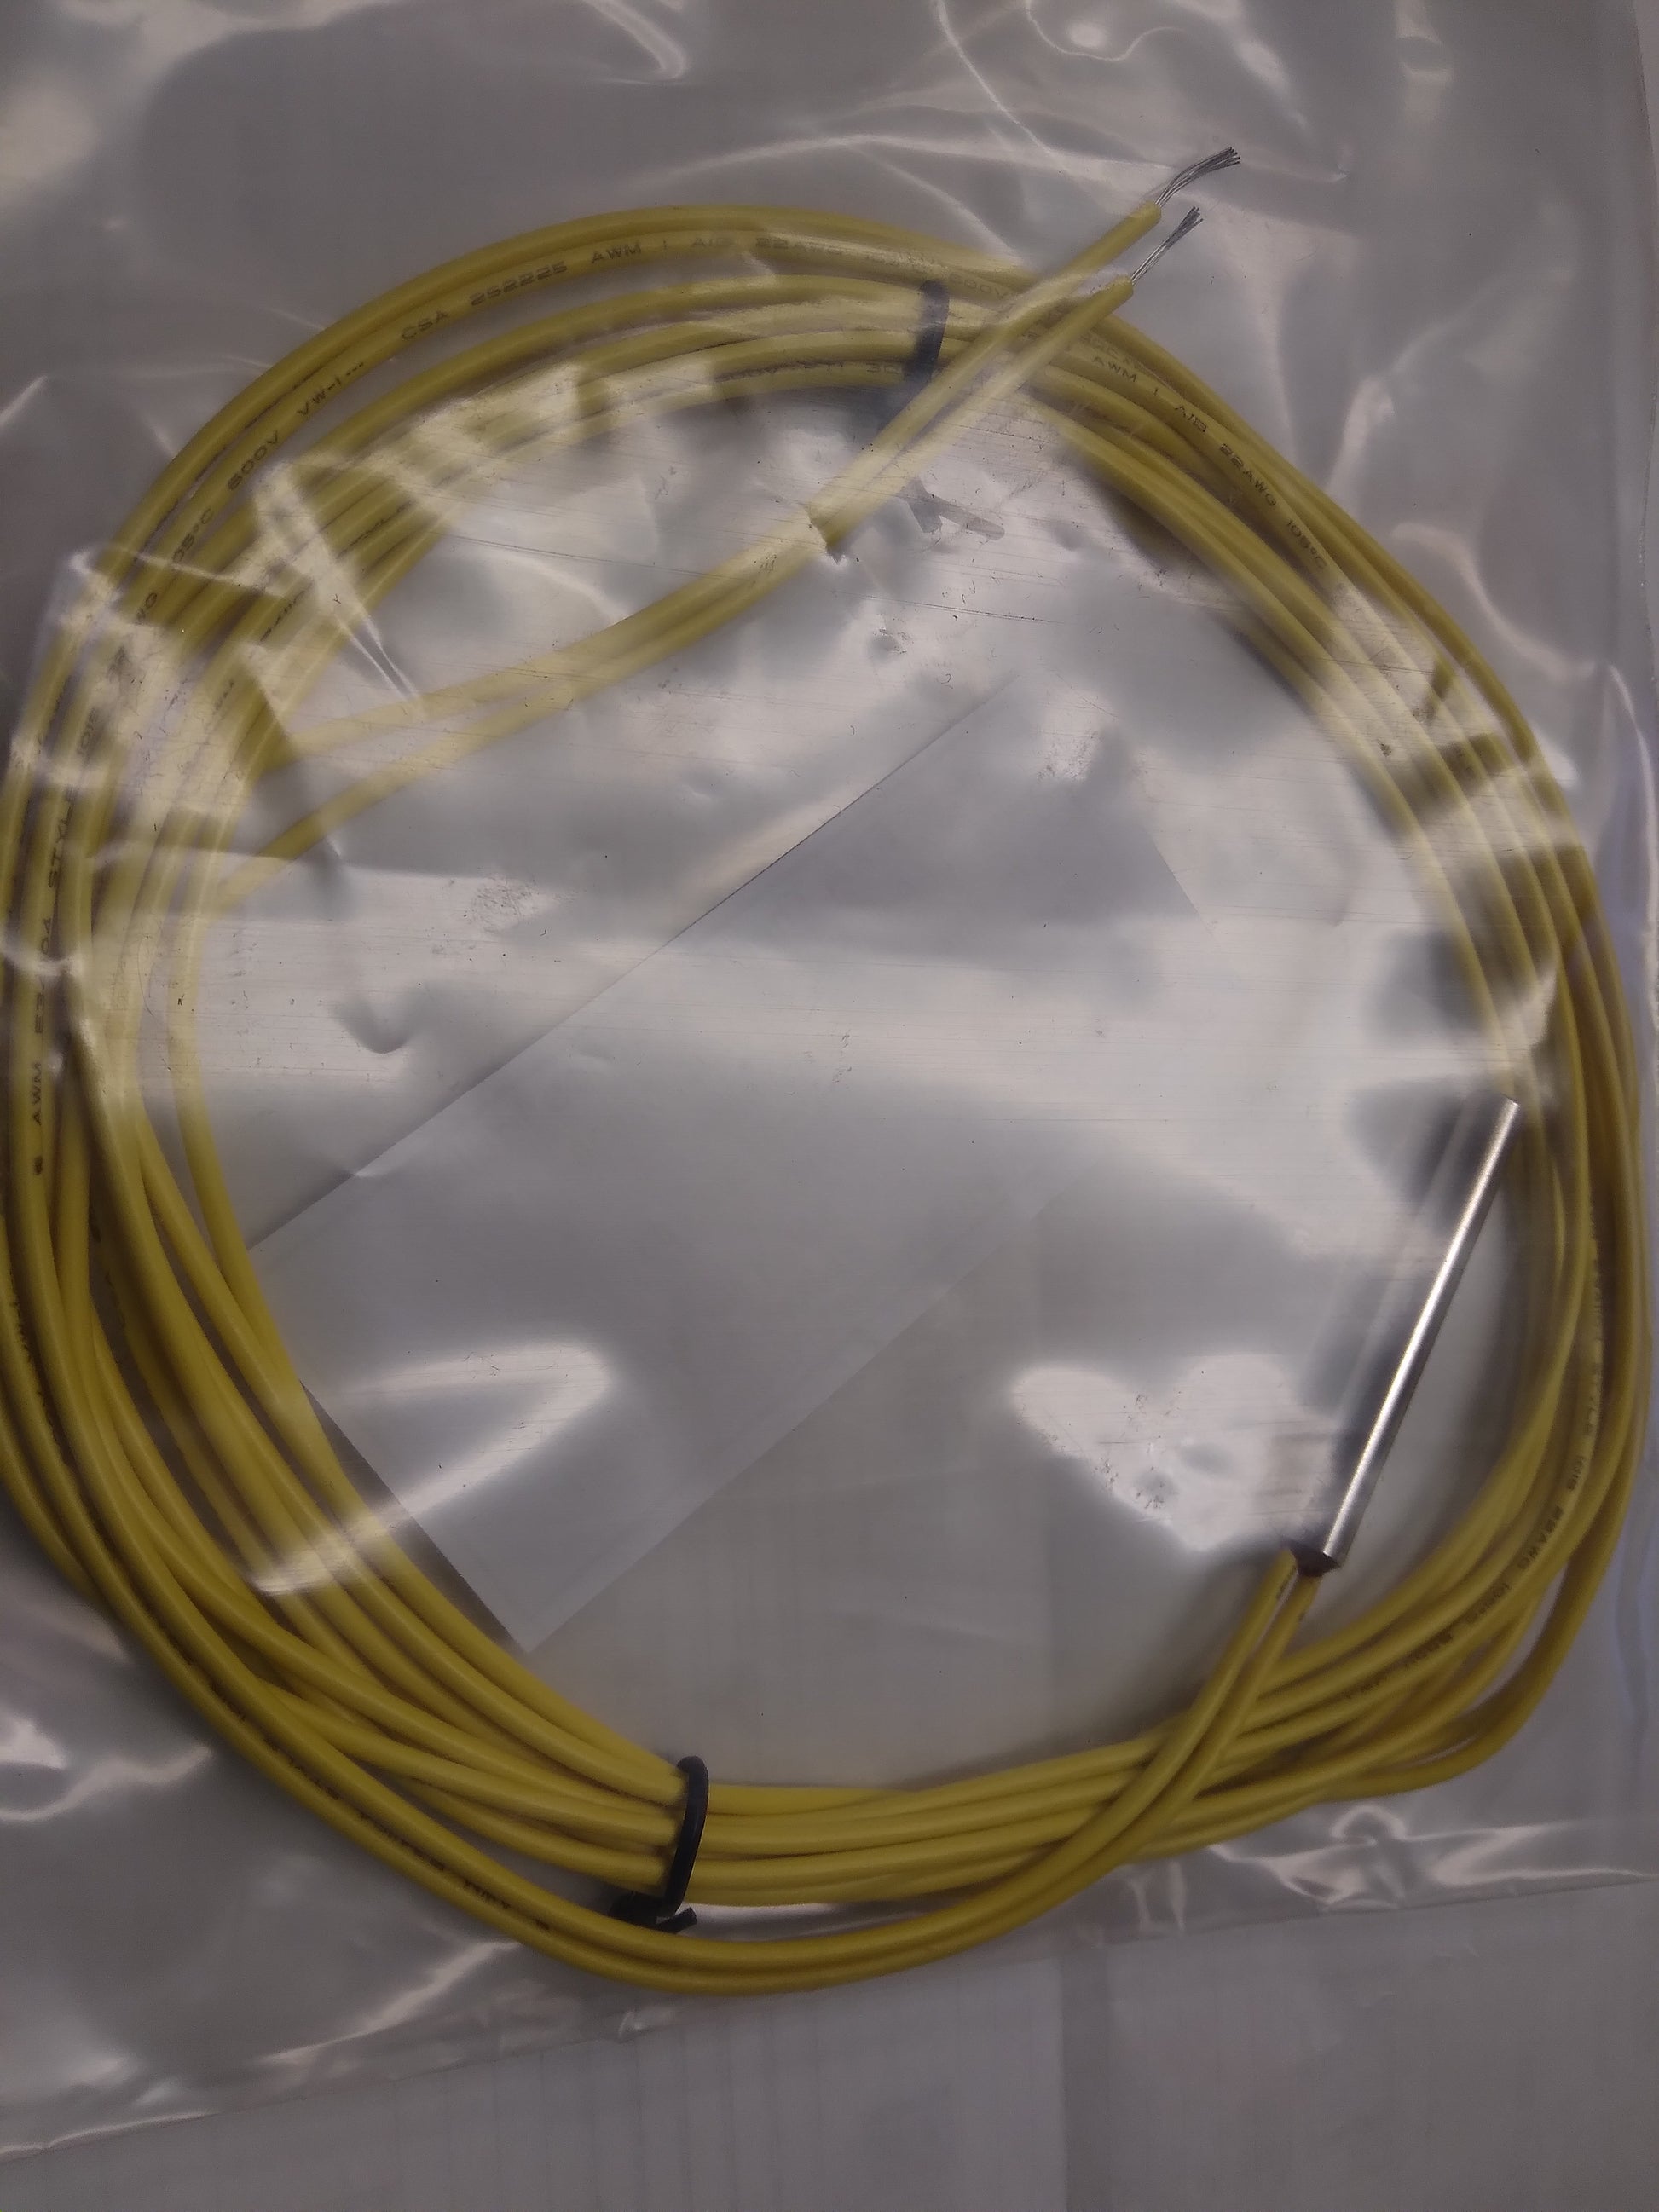 THERMISTOR WIRE ASSEMBLY -10 TO 150F RANGE